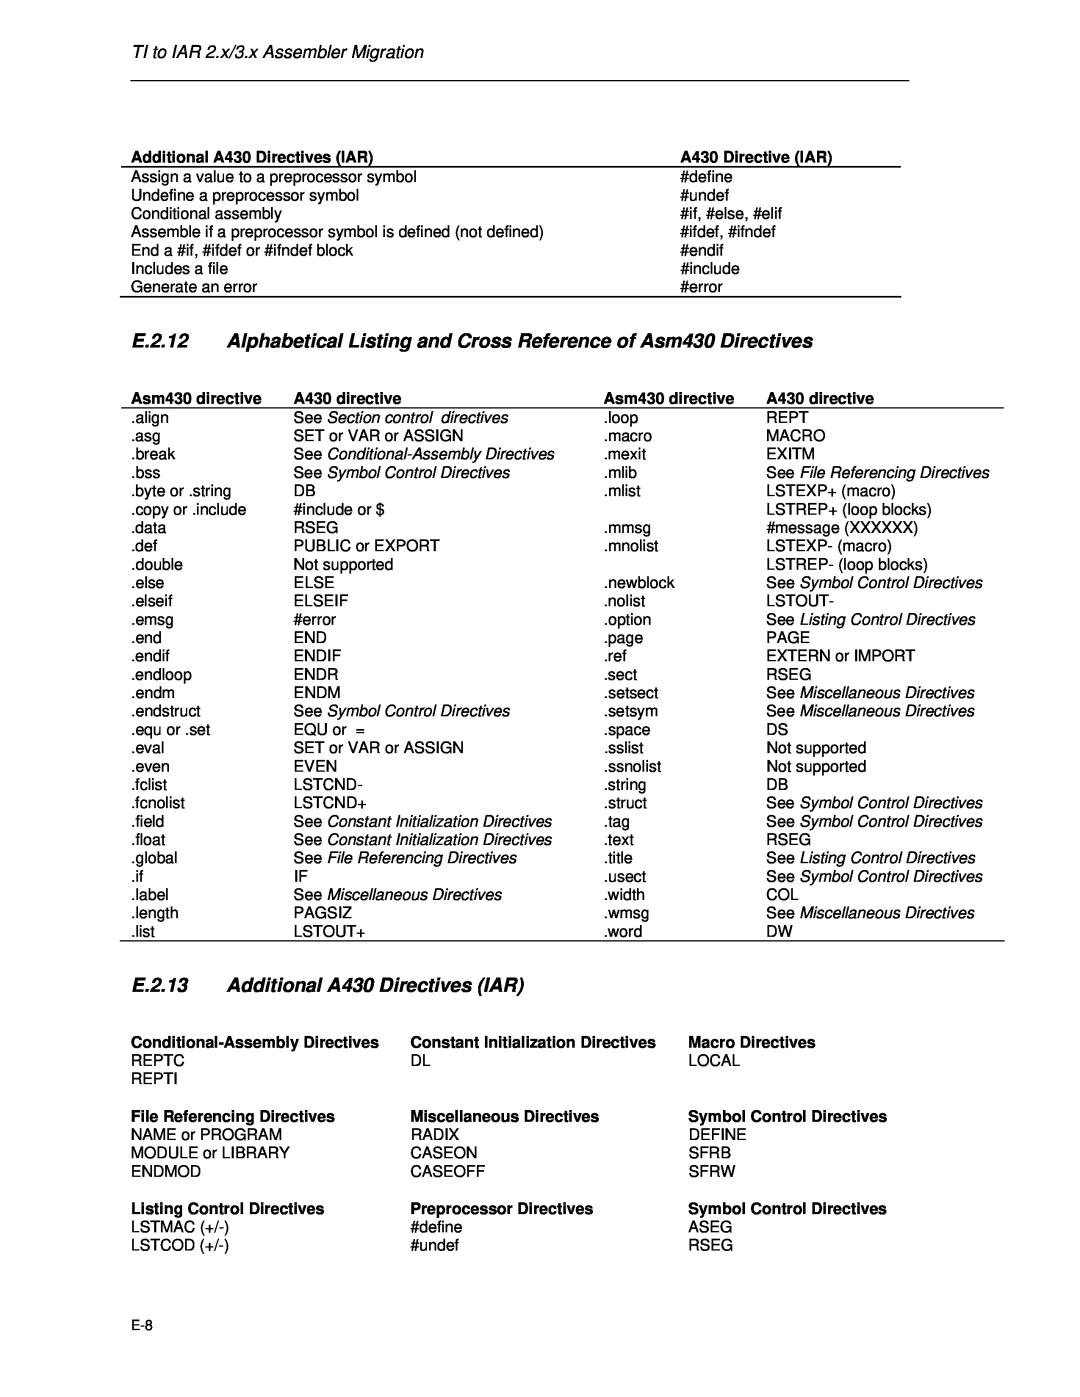 Texas Instruments MSP-FET430 manual E.2.12, Alphabetical Listing and Cross Reference of Asm430 Directives, E.2.13 